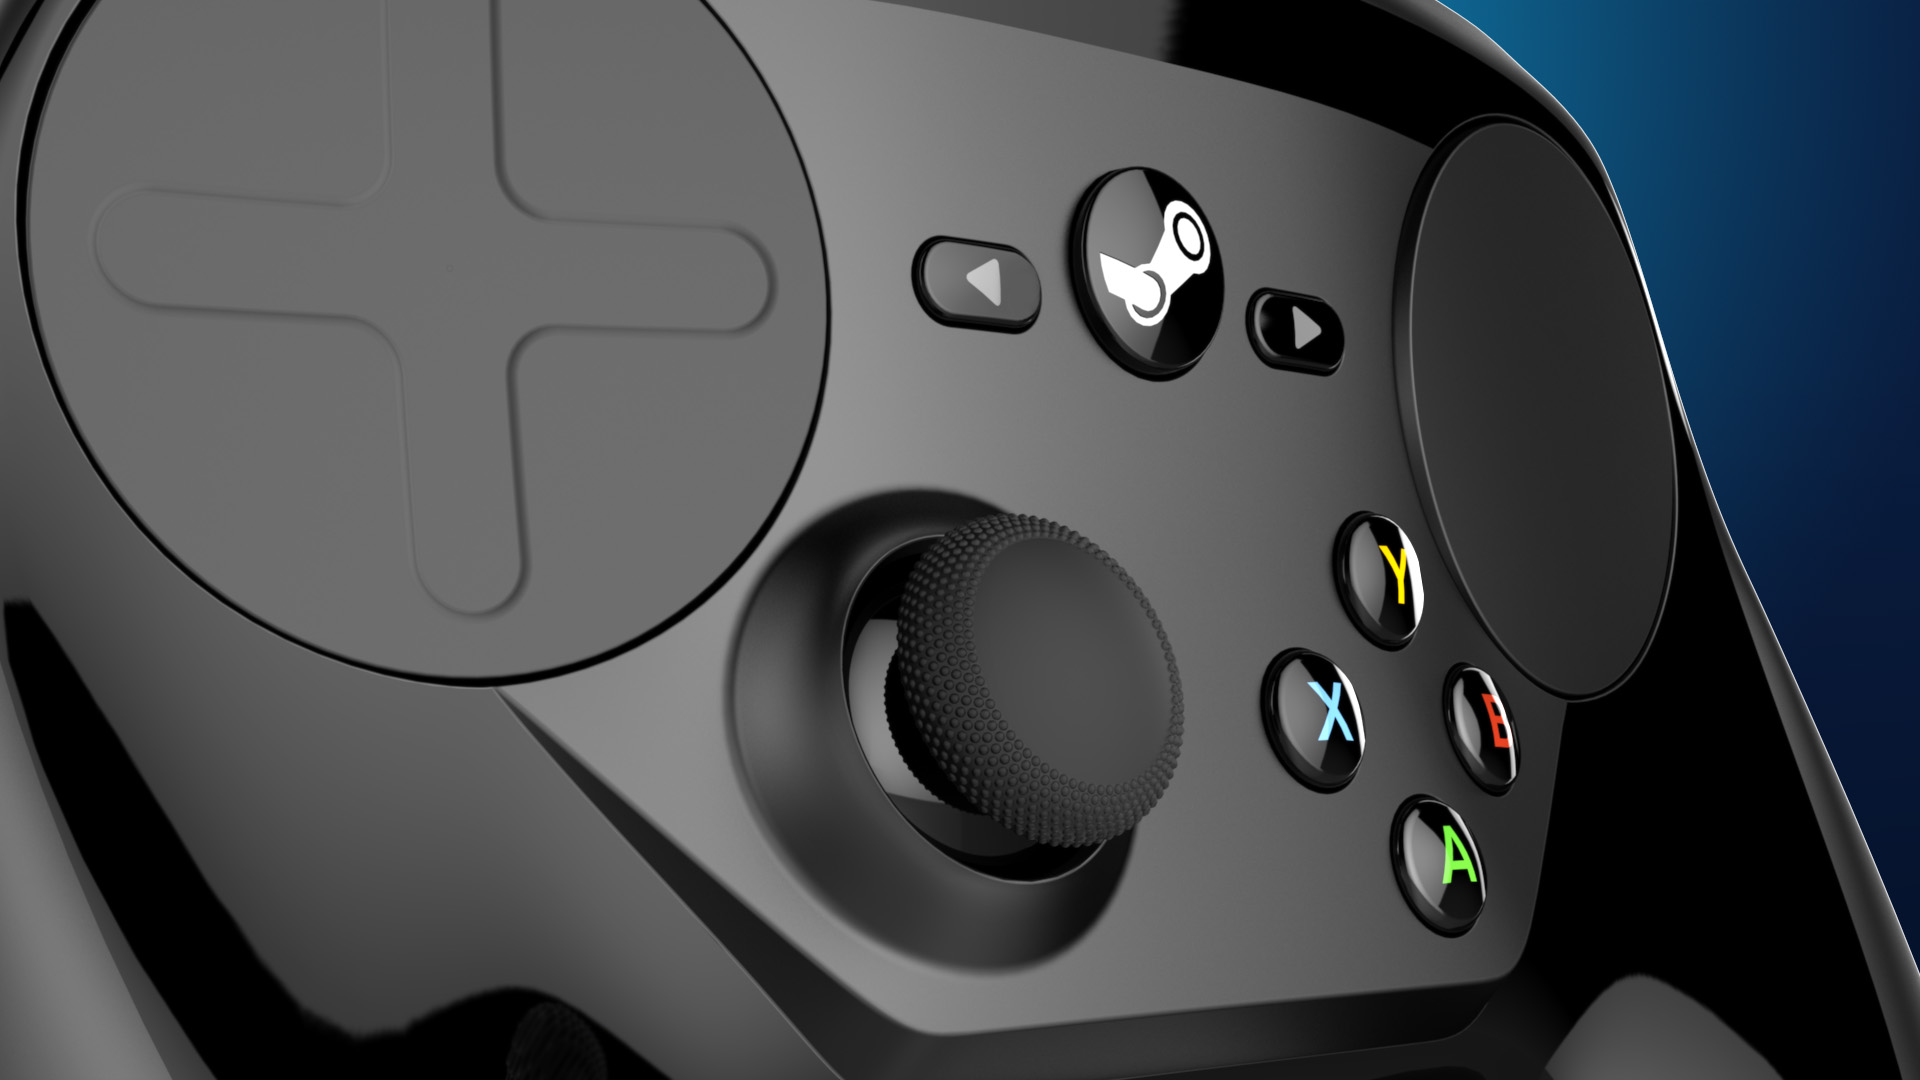 You Can Finally Get a Look at the Steam Controller